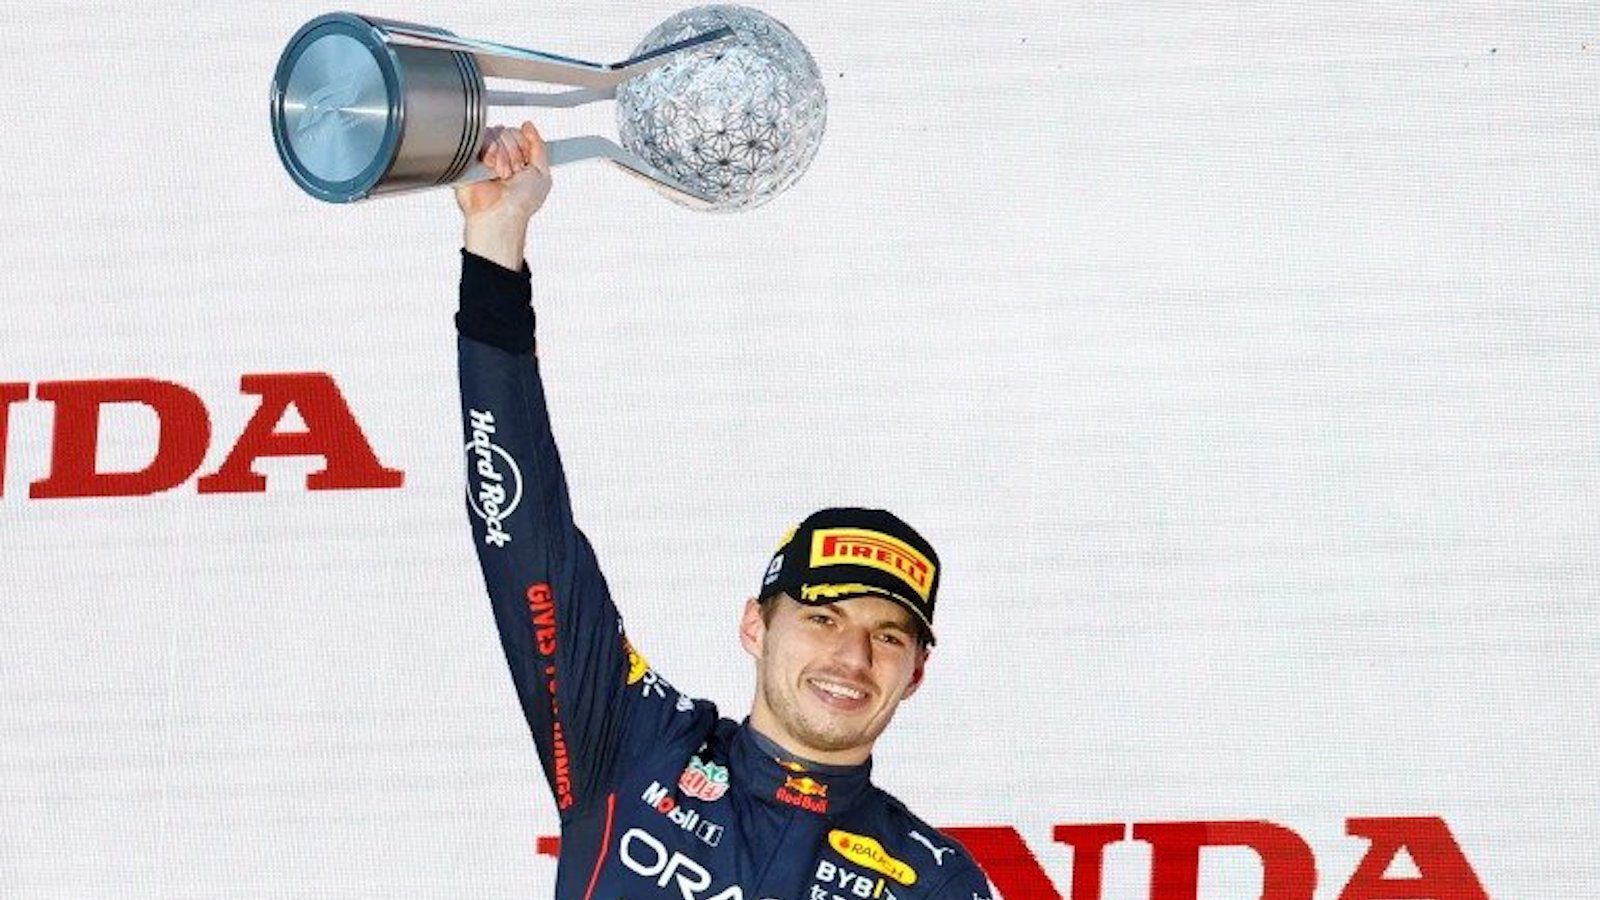 Verstappen Wins in Japan; Clinches Second Championship